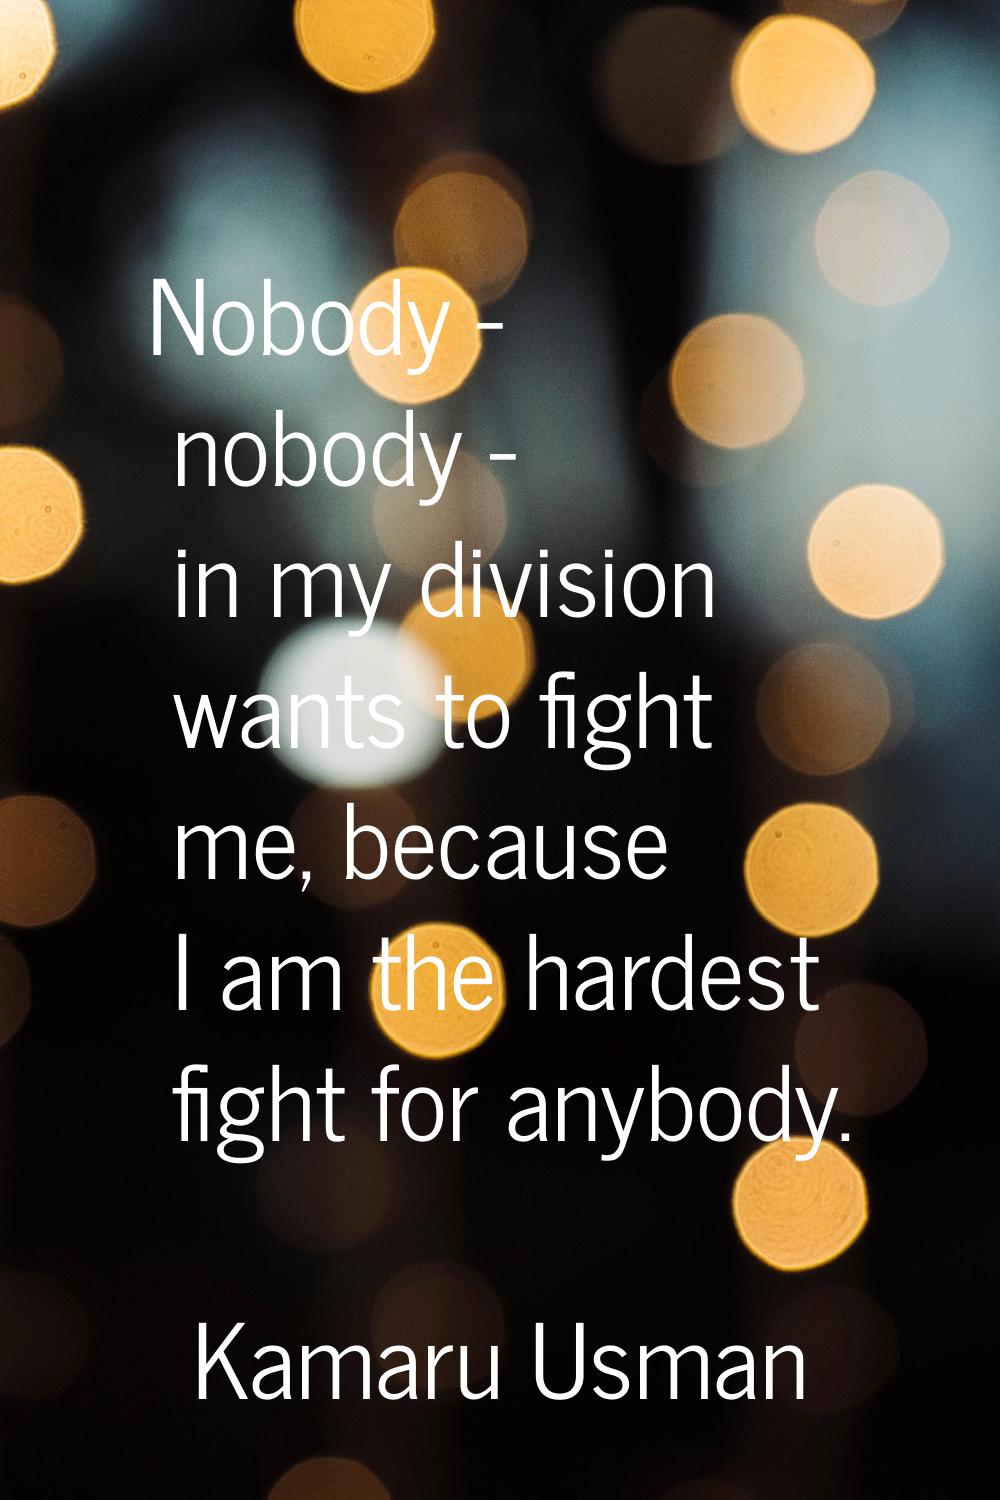 Nobody - nobody - in my division wants to fight me, because I am the hardest fight for anybody.